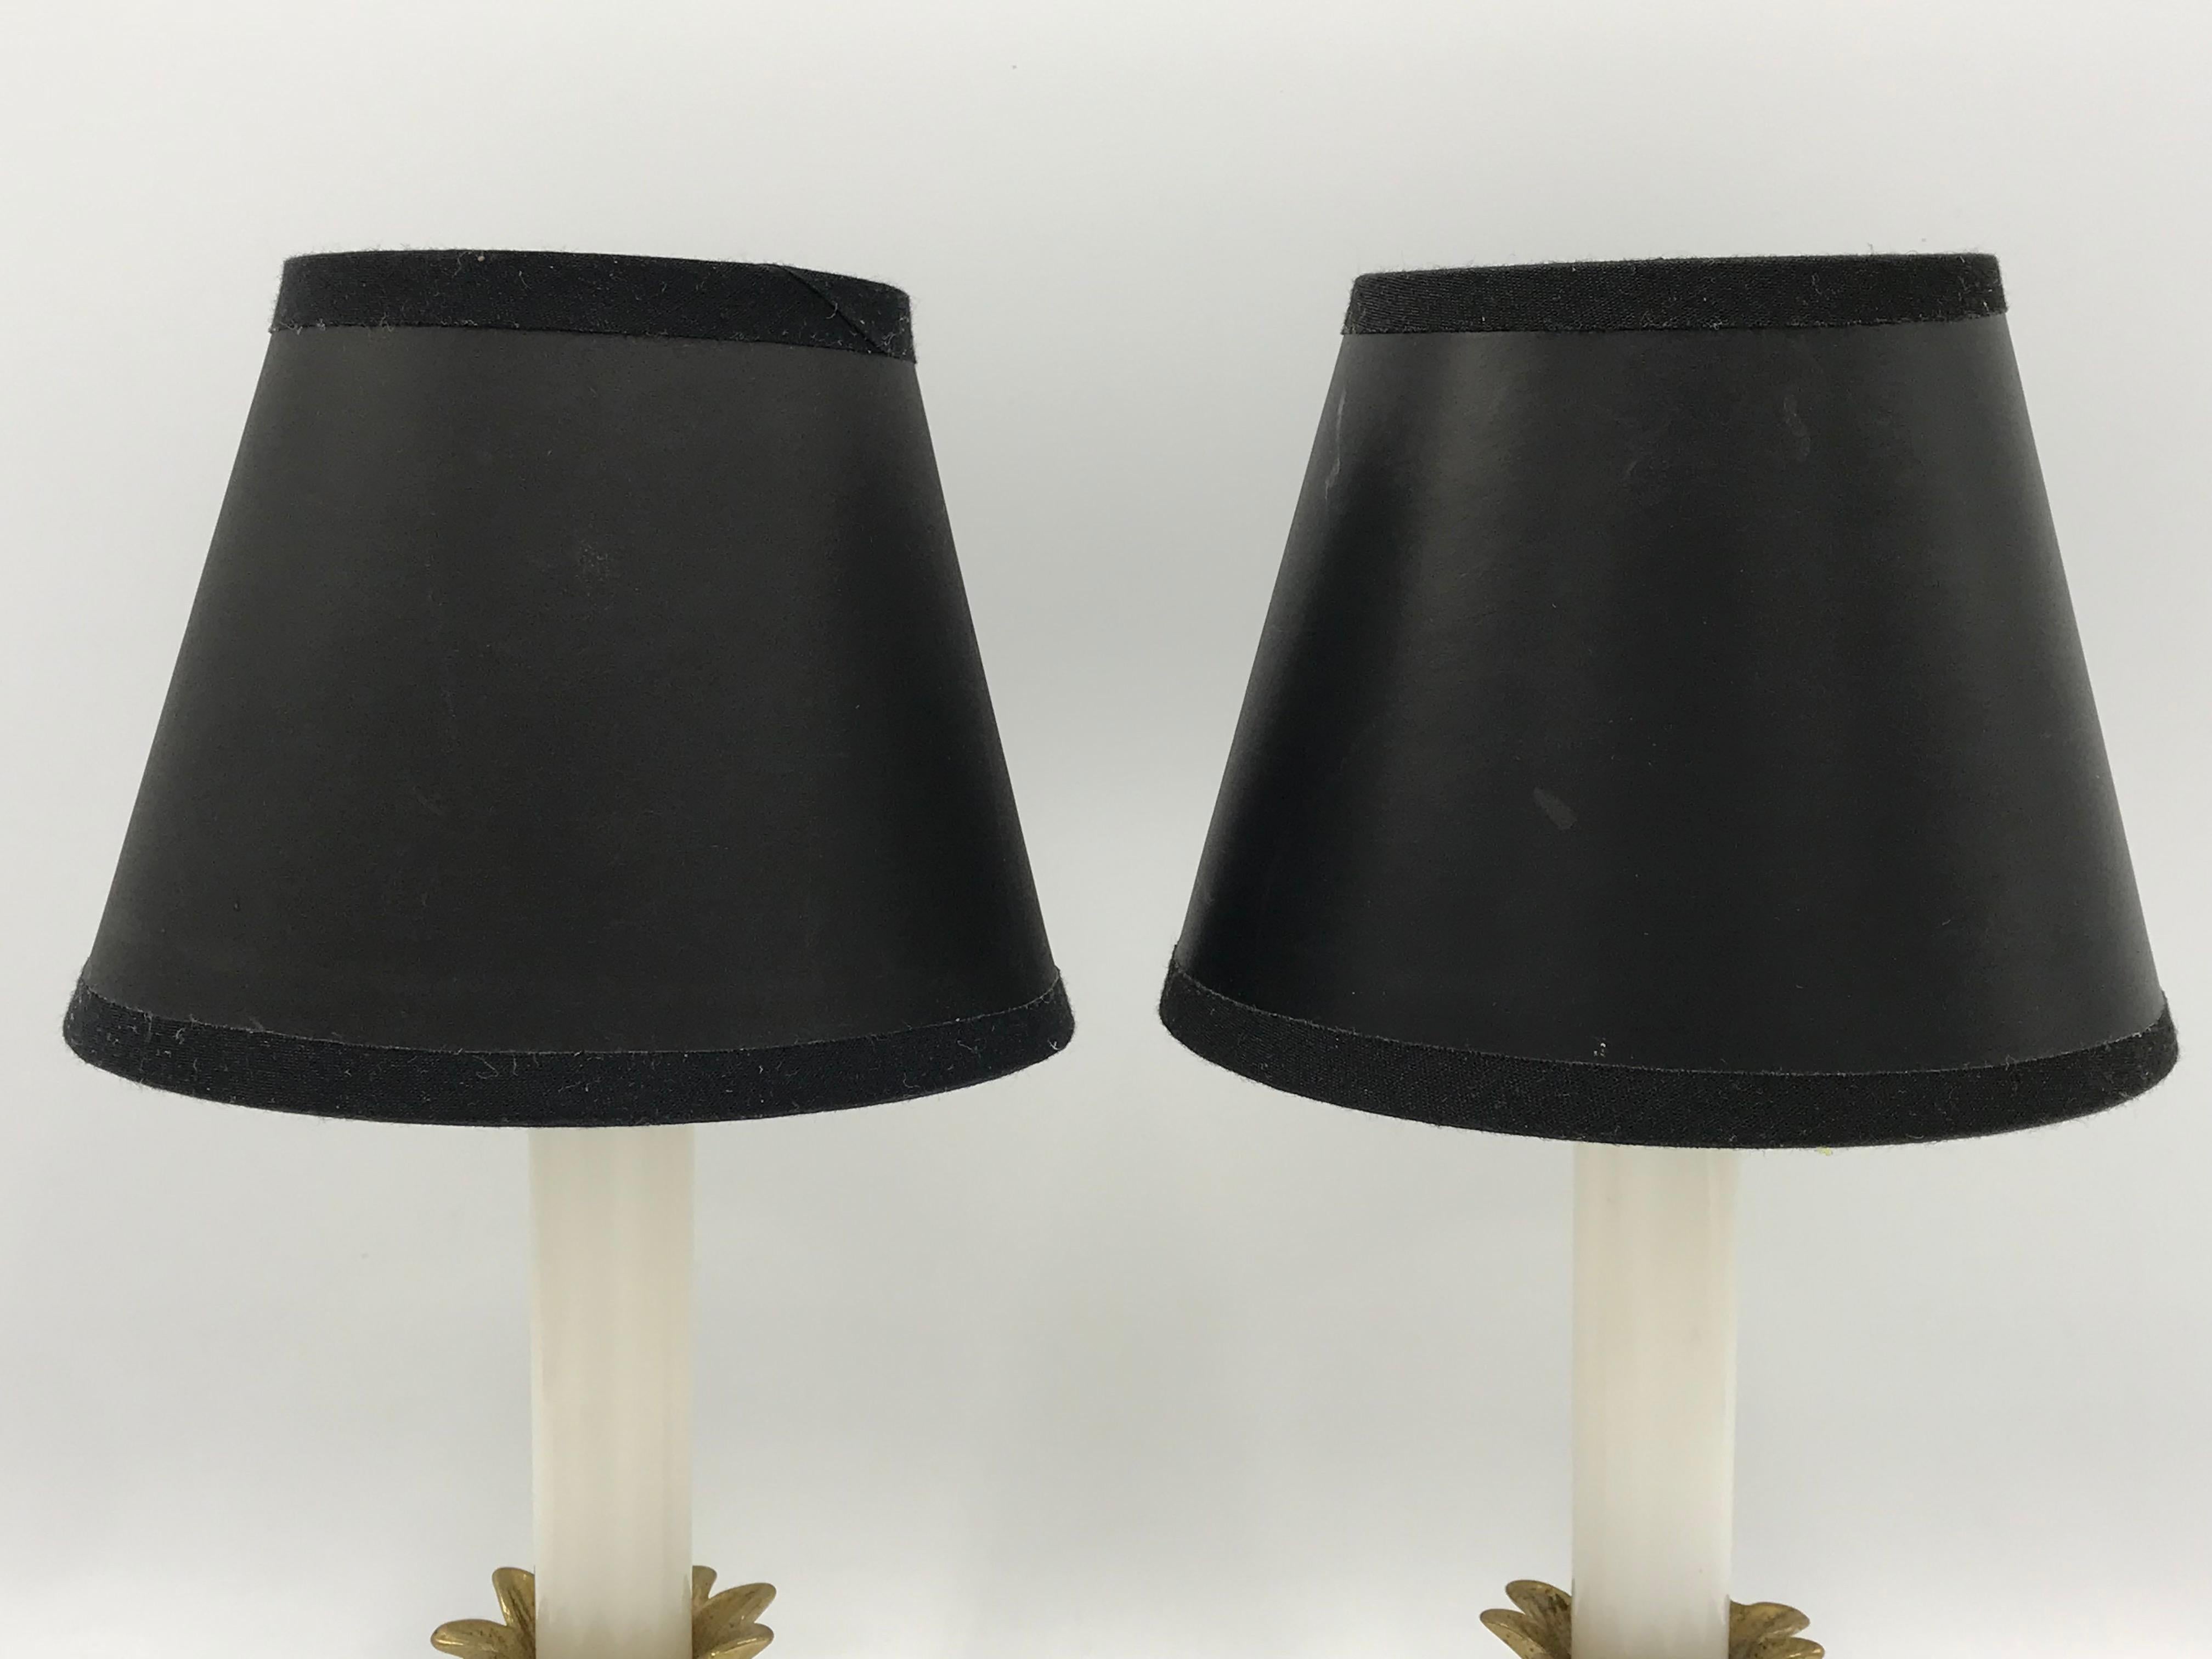 Offered is a fabulous, little pair of 1980s brass pineapple sculptural candlestick lamps. The pair includes black paper shades (minor wear, expected with age). Wiring is in excellent, working condition. Diameter with shades is 5in. Diameter without